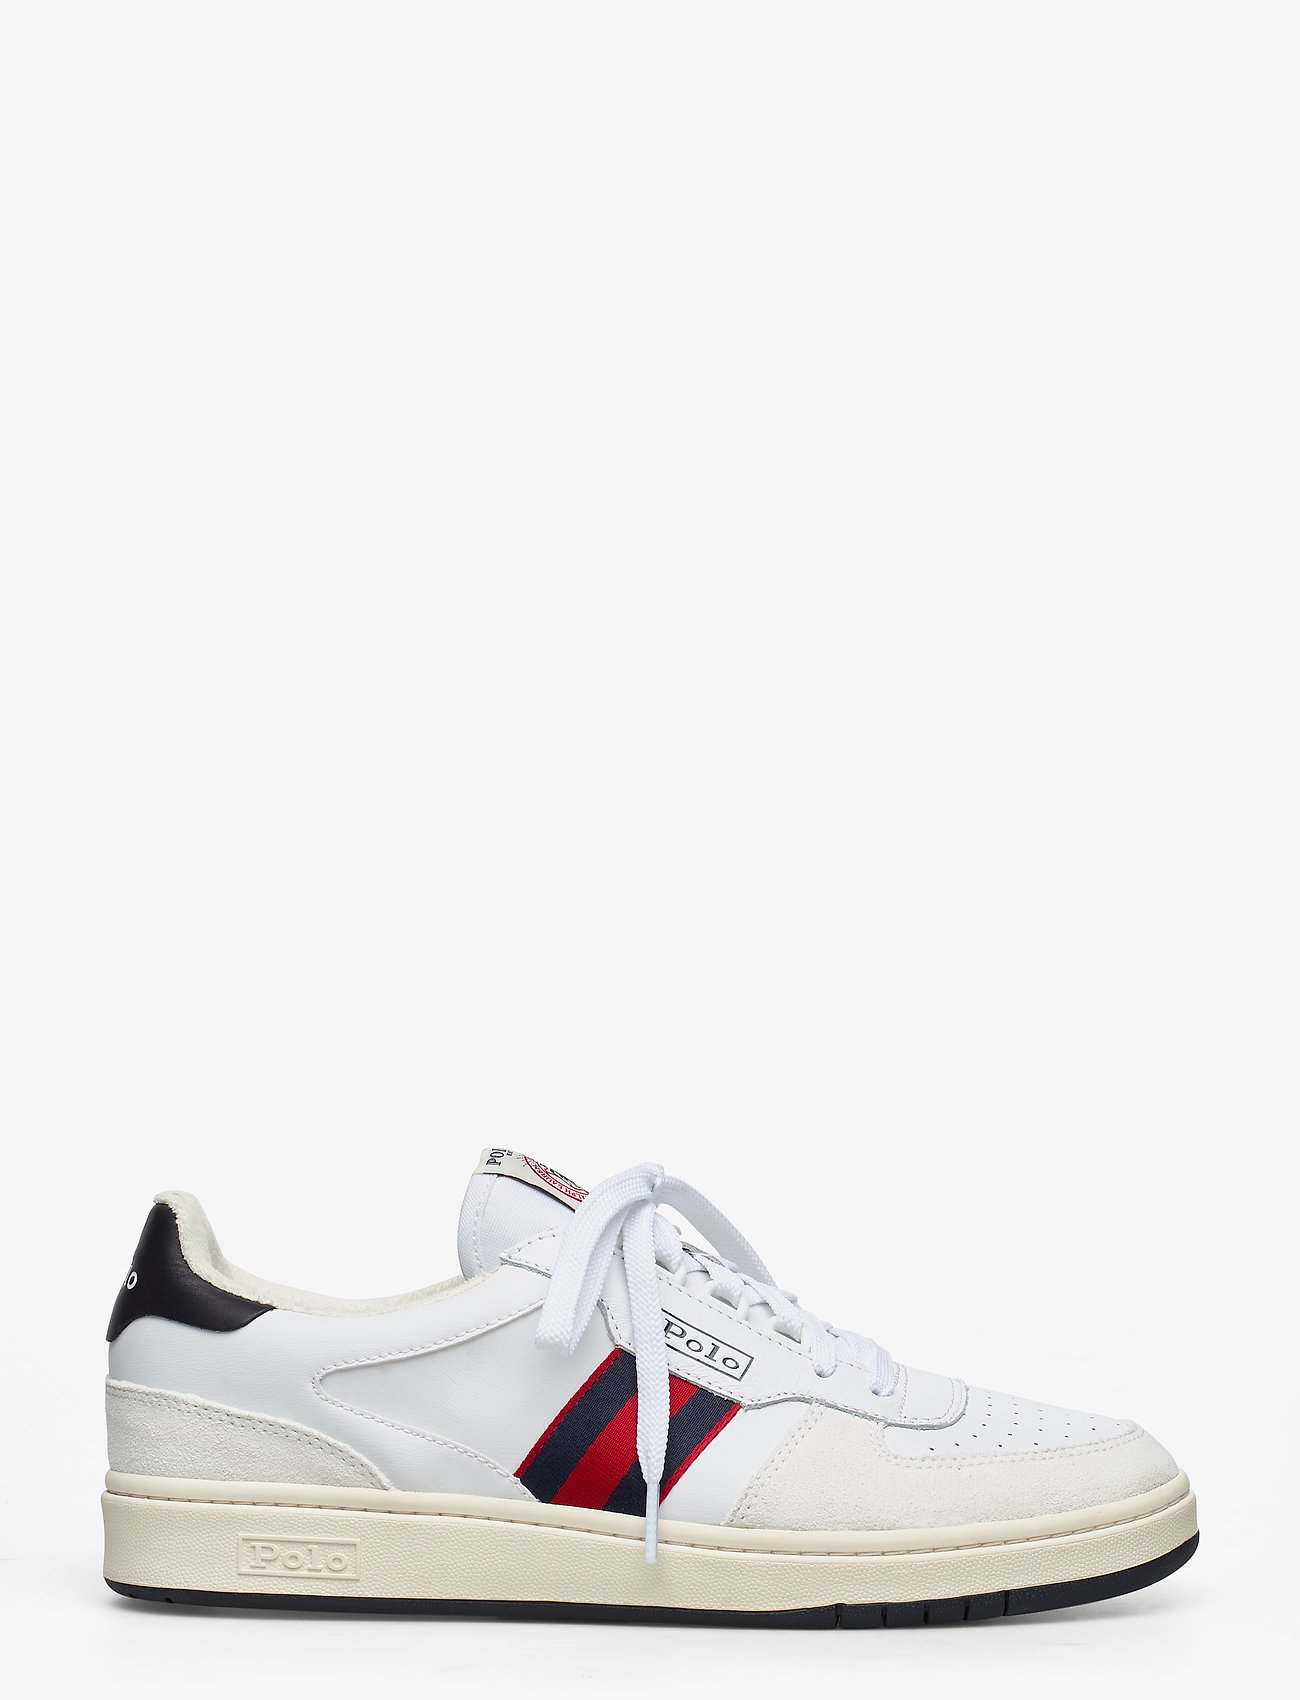 polo court 1 leather sneaker